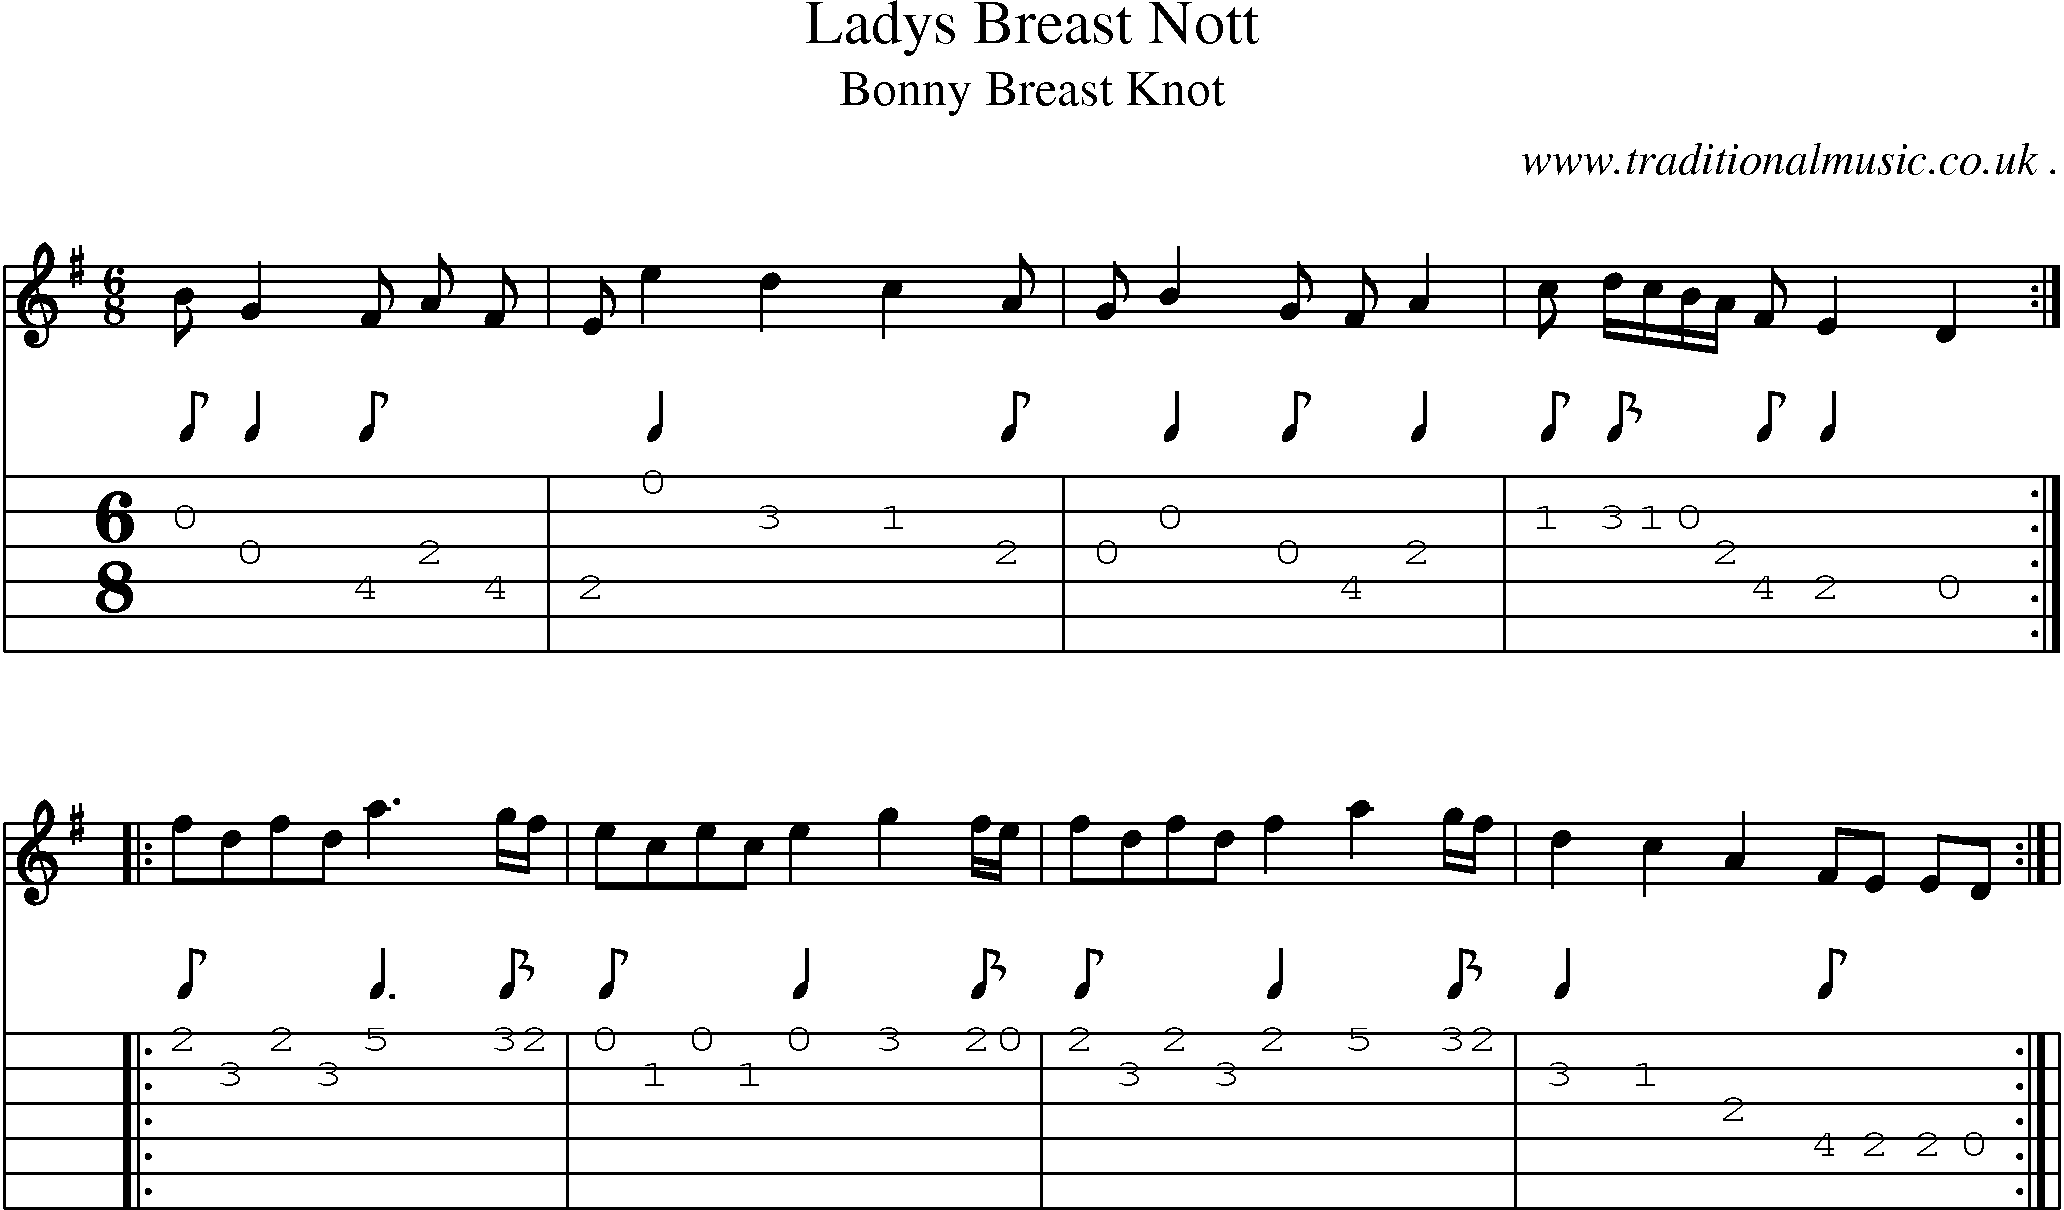 Sheet-Music and Guitar Tabs for Ladys Breast Nott